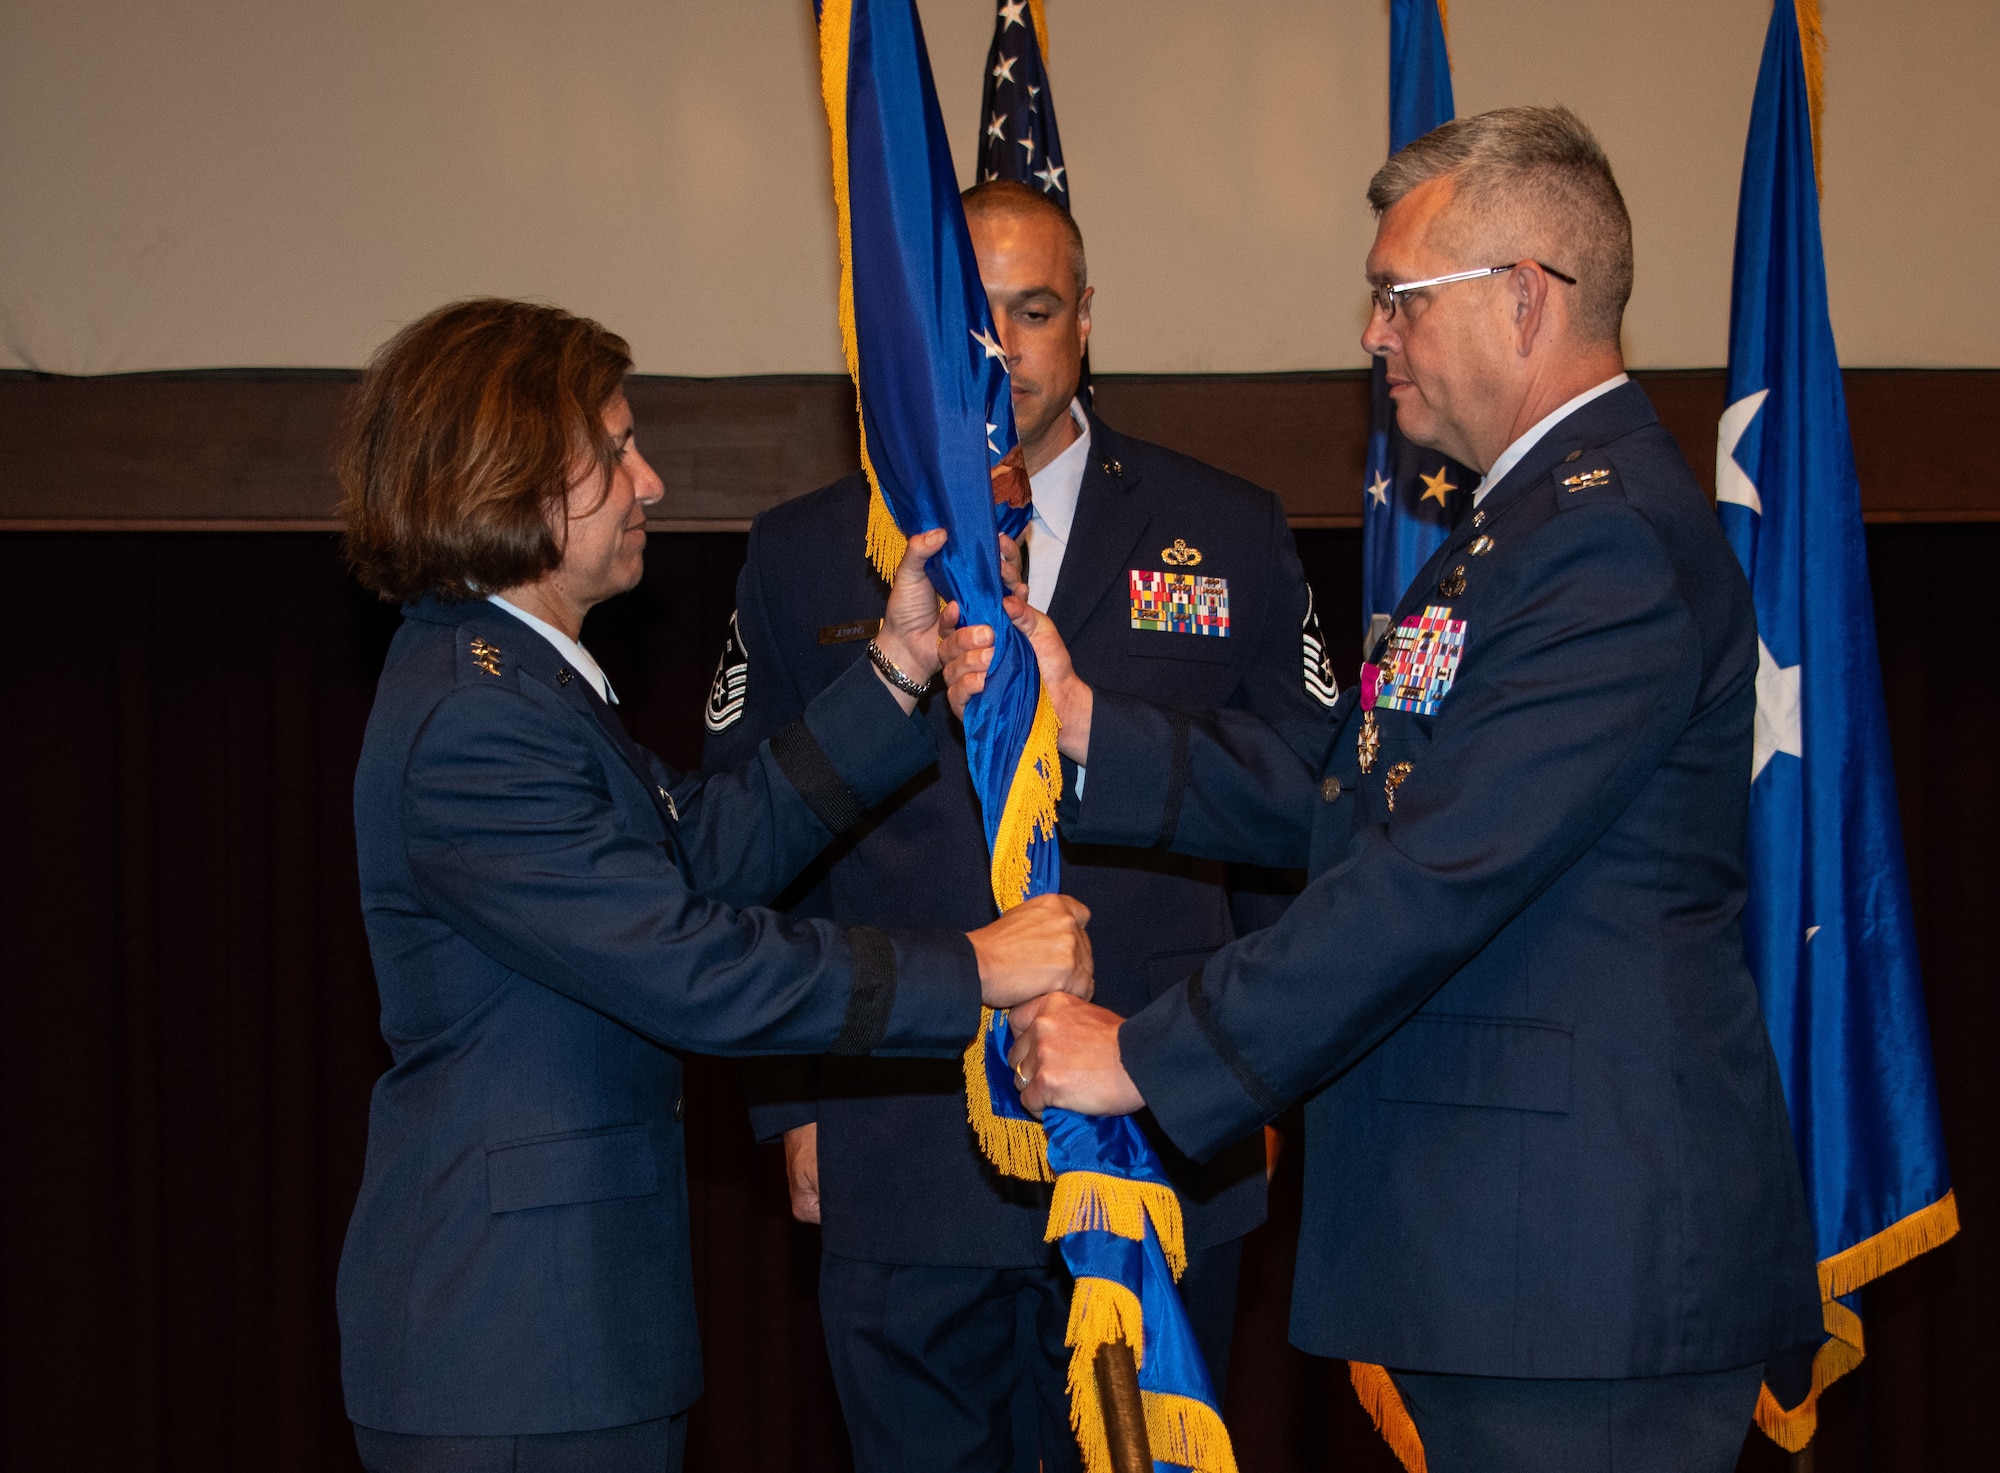 Col. Anthony D. Babcock relinquishes command by passing the Thomas N. Barnes Center for Enlisted Education organizational flag to Lt. Gen. Andrea D. Tullos, Air University commander and president, during a change of command ceremony at the Senior Noncommissioned Officer Academy on Maxwell Air Force Base - Gunter Annex, June 28, 2023. (U.S. Air Force photo/Brian Ferguson)